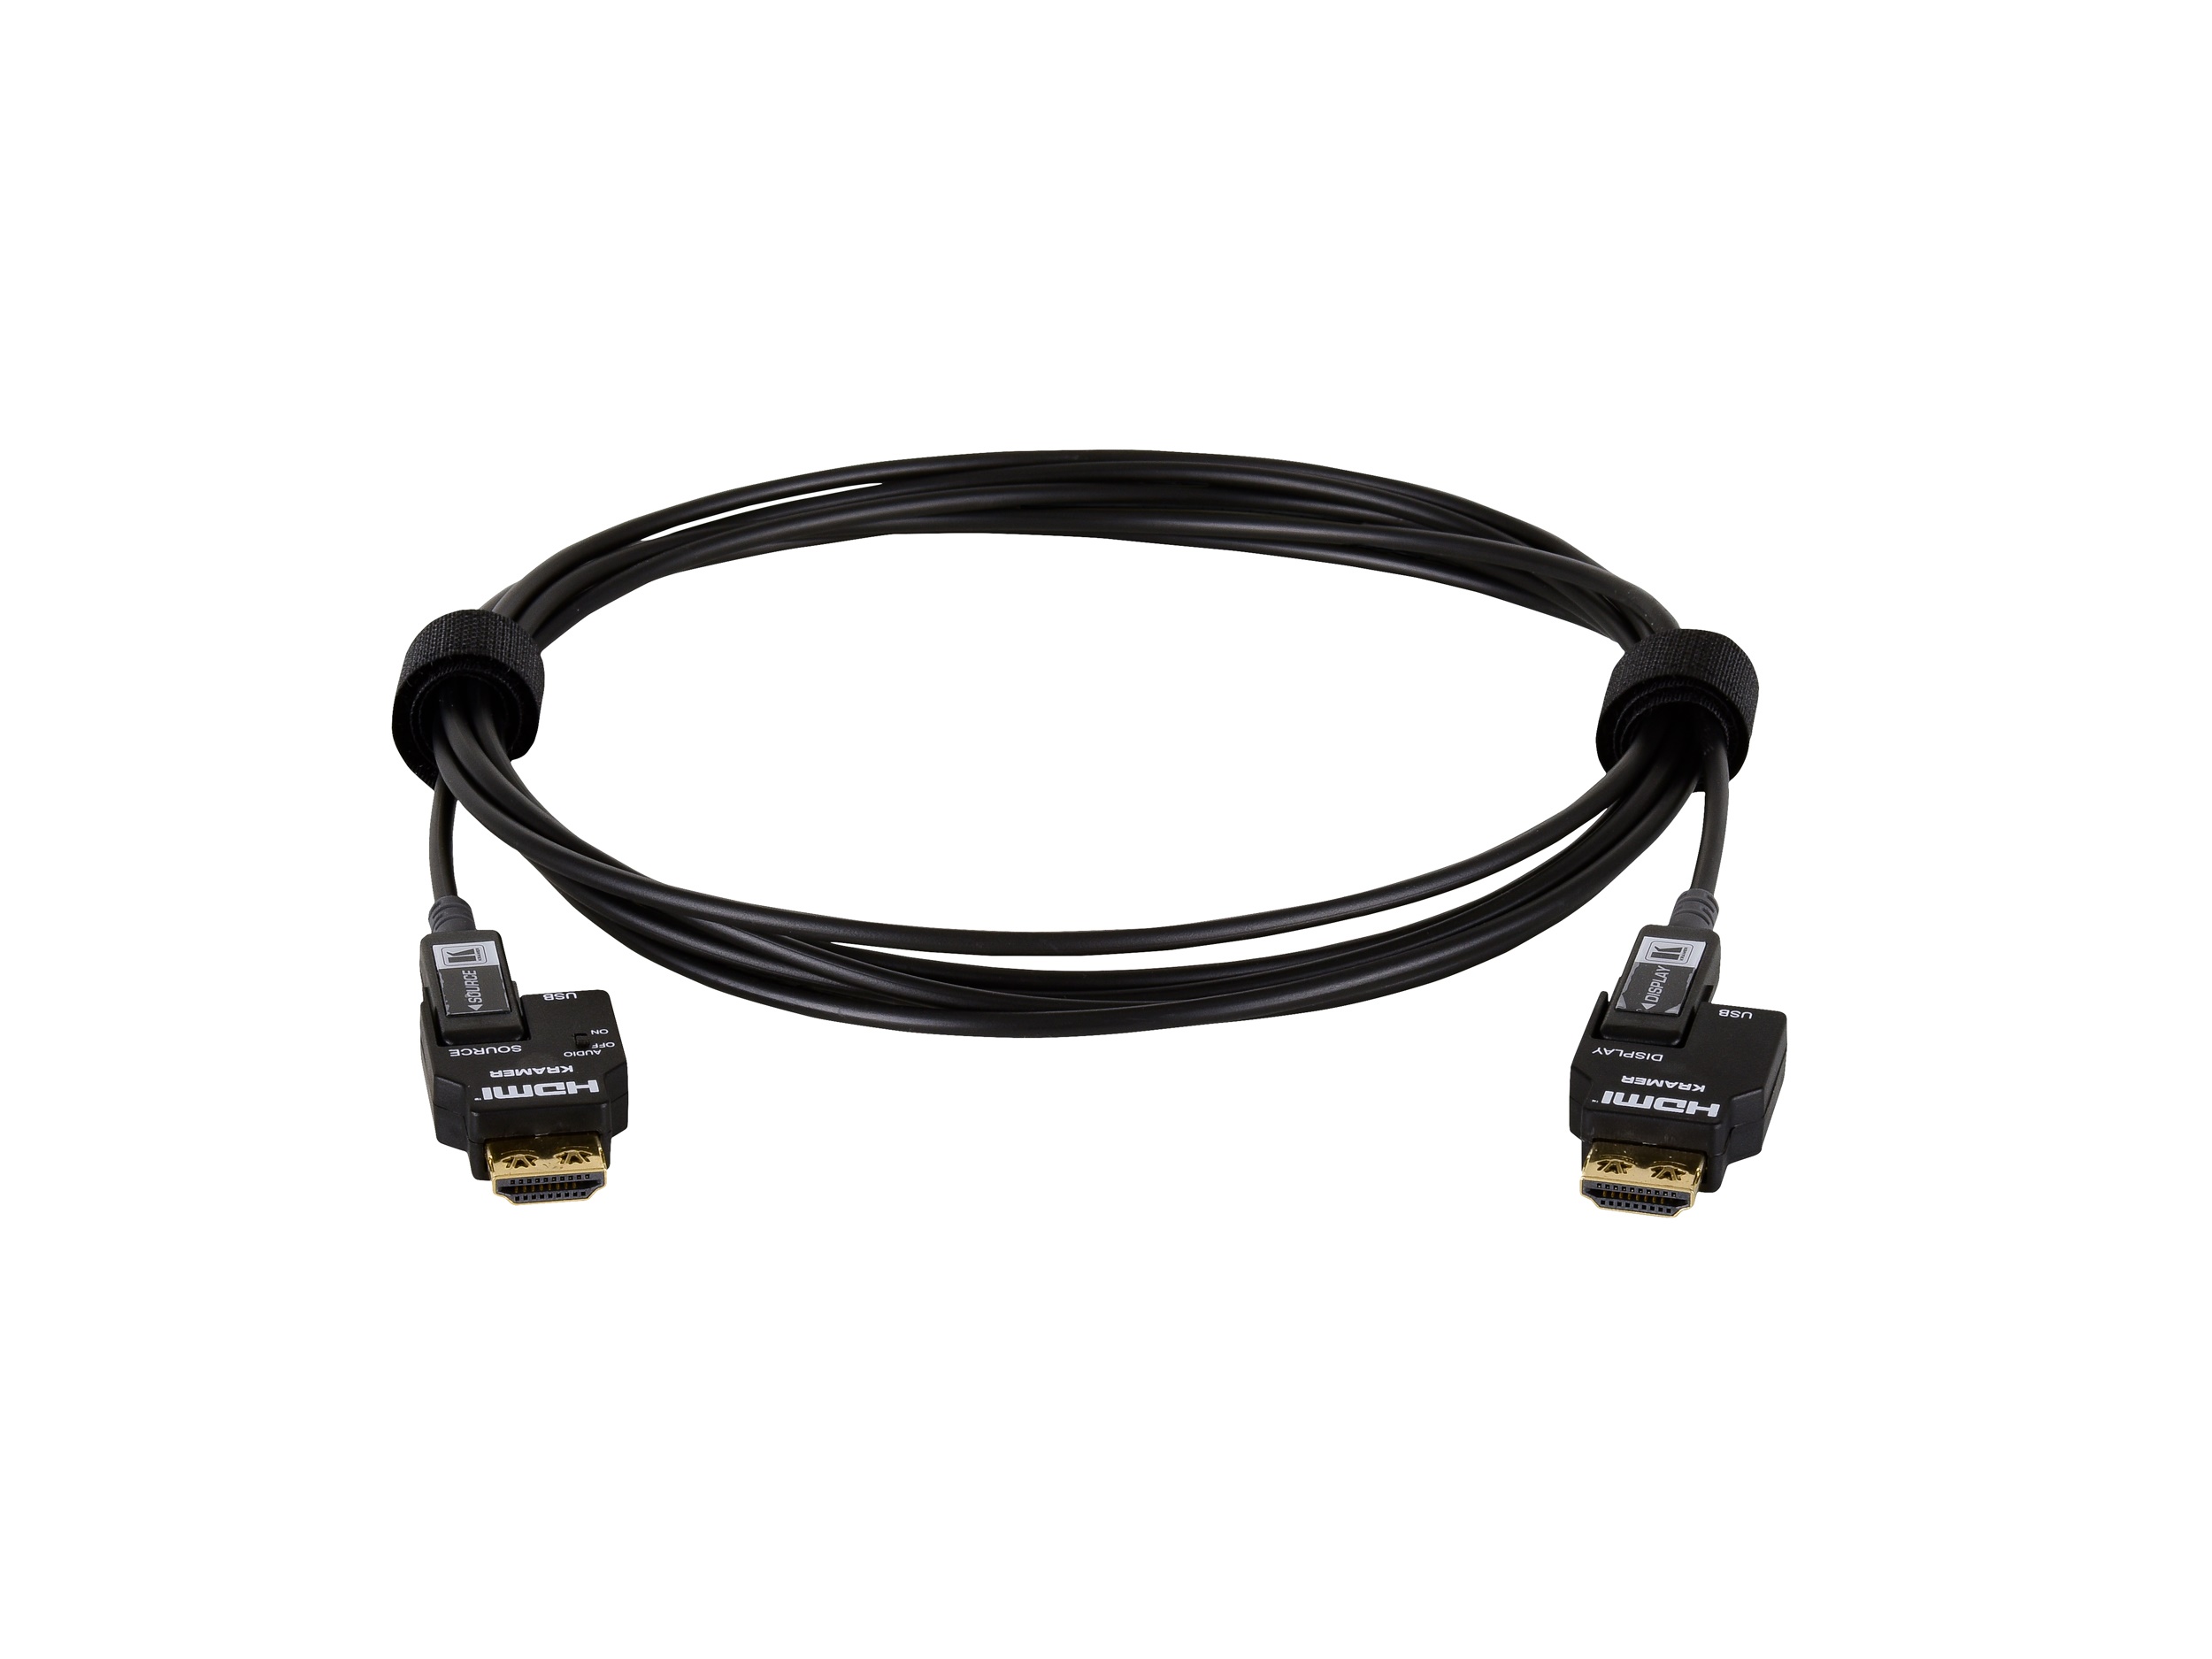 CRS-FIBERH-S1-15 4.6m/15ft 4K/60Hz (4x2x0) Secured Unidirectional 4K Pluggable HDMI Cable over Pure Fiber Cable by Kramer